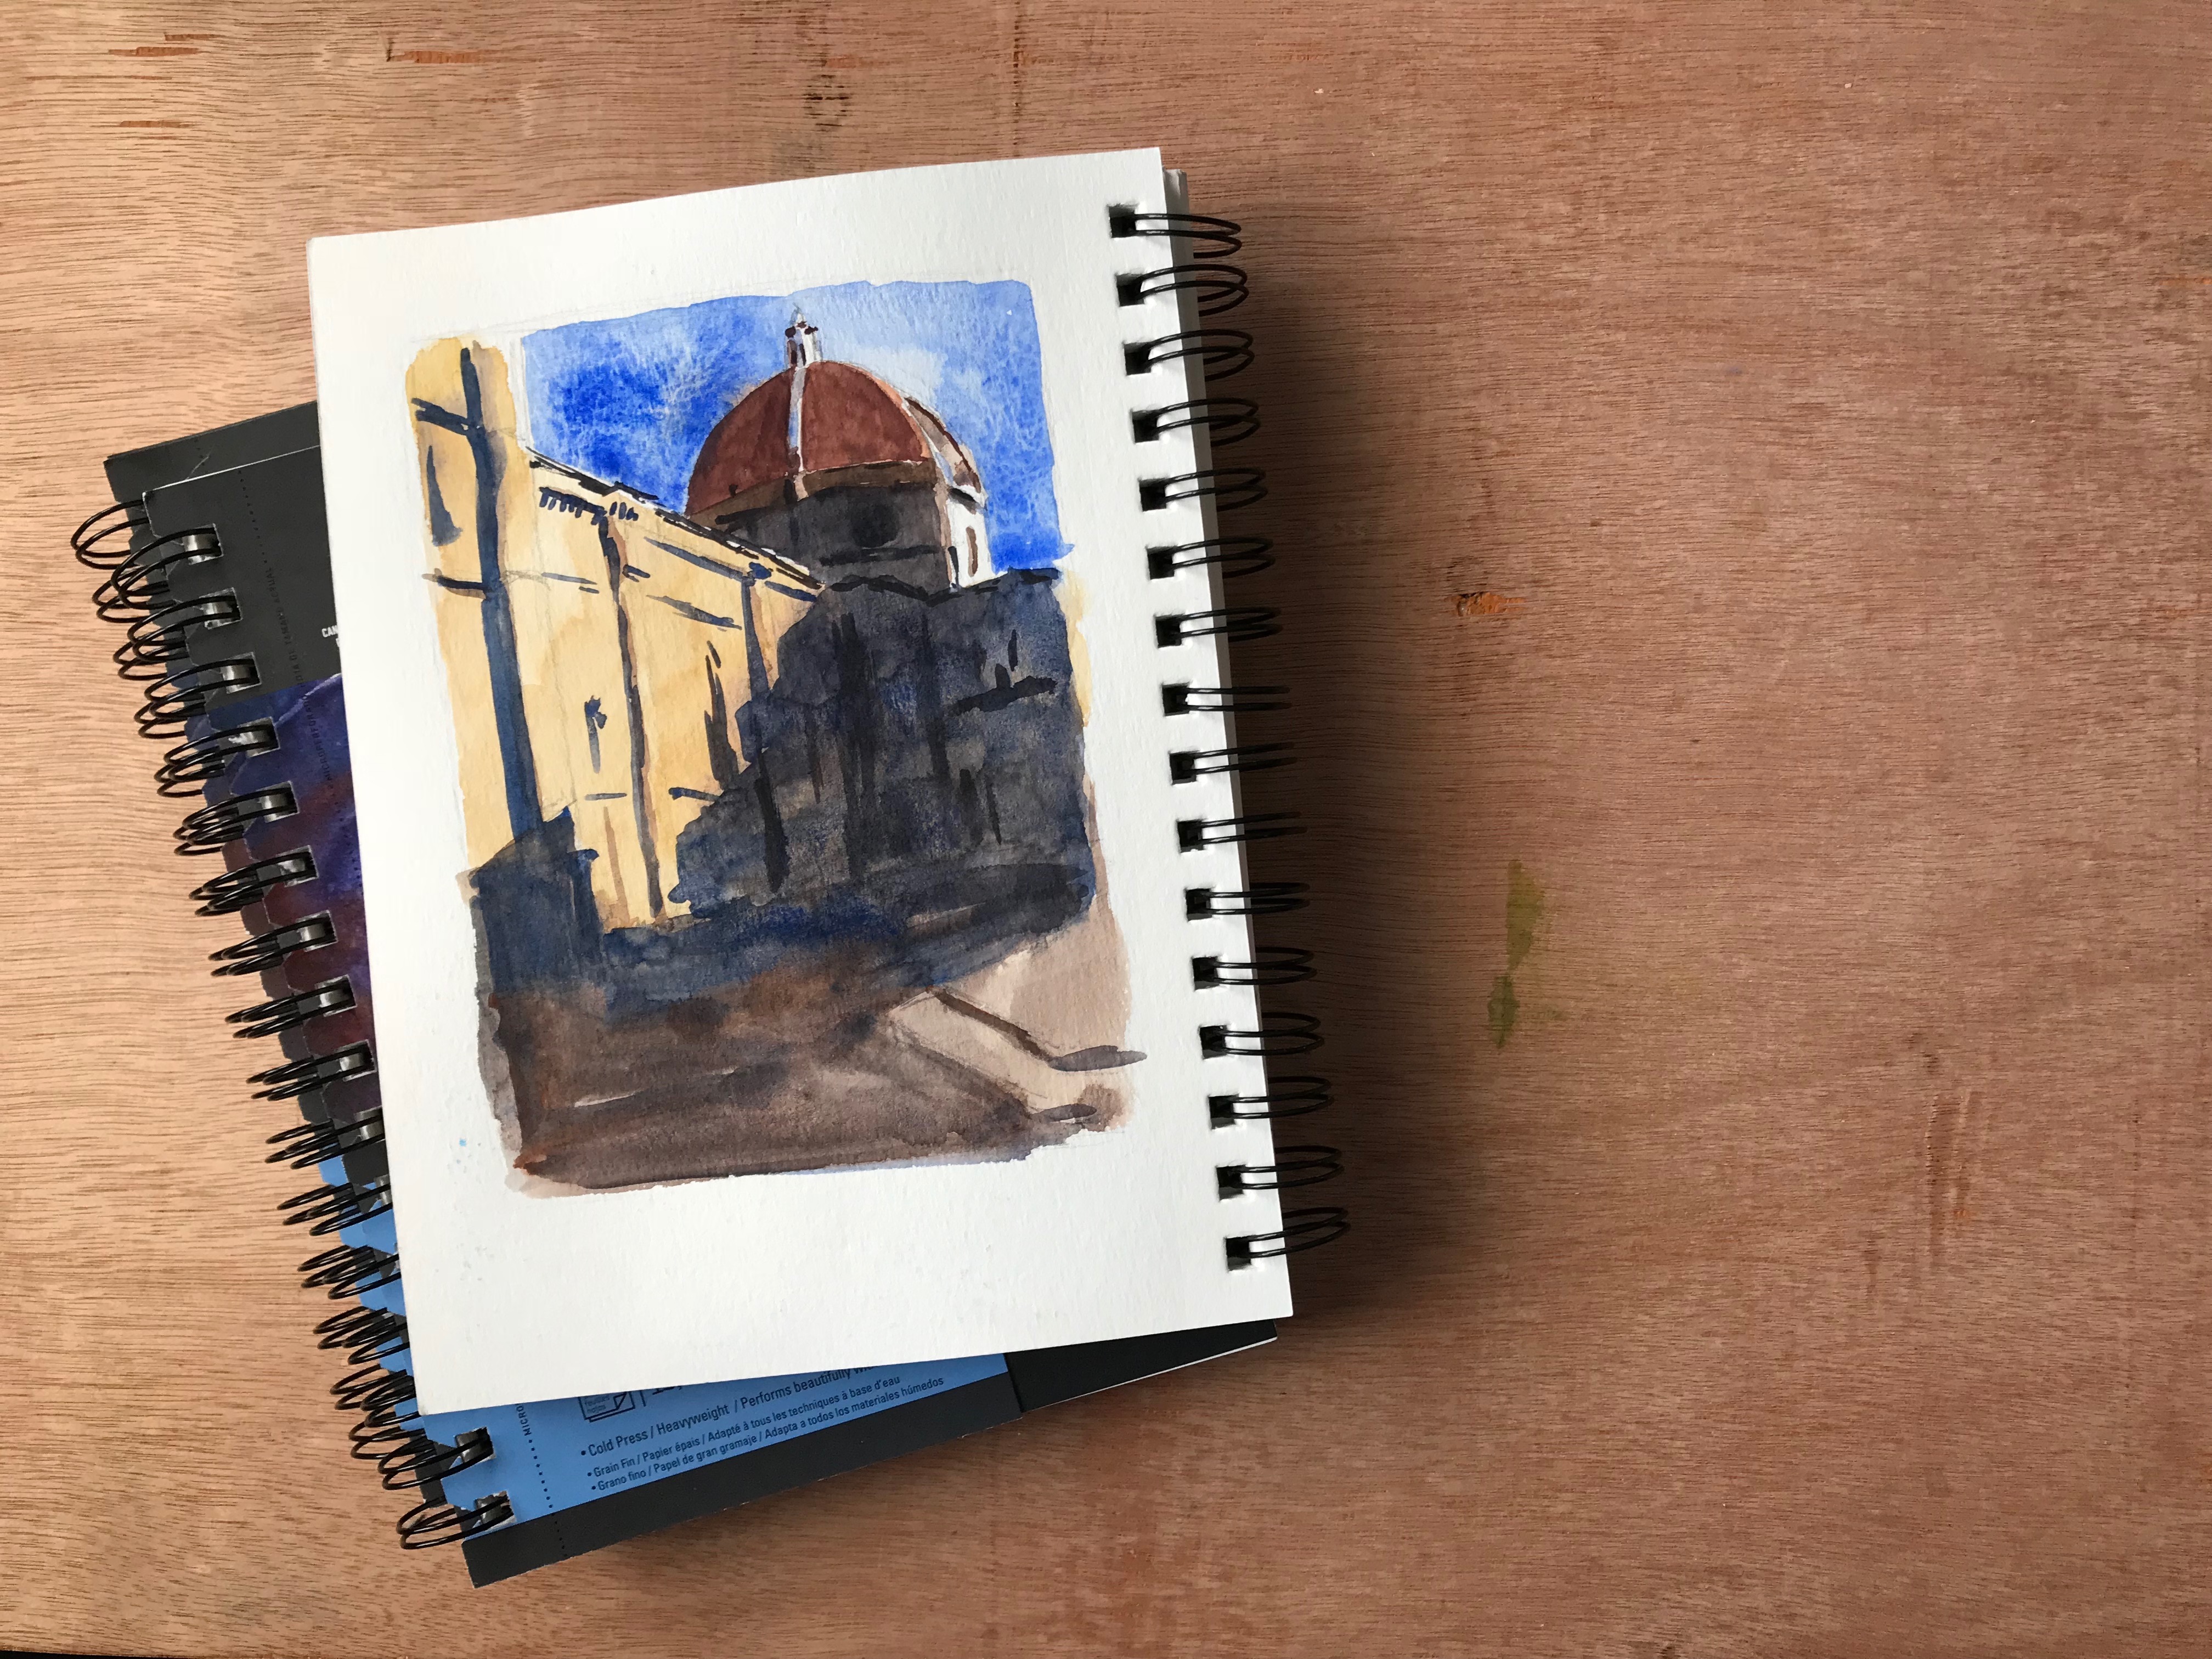 Painted the Duomo in Florence using Cobalt Blue by ShinHan PWC